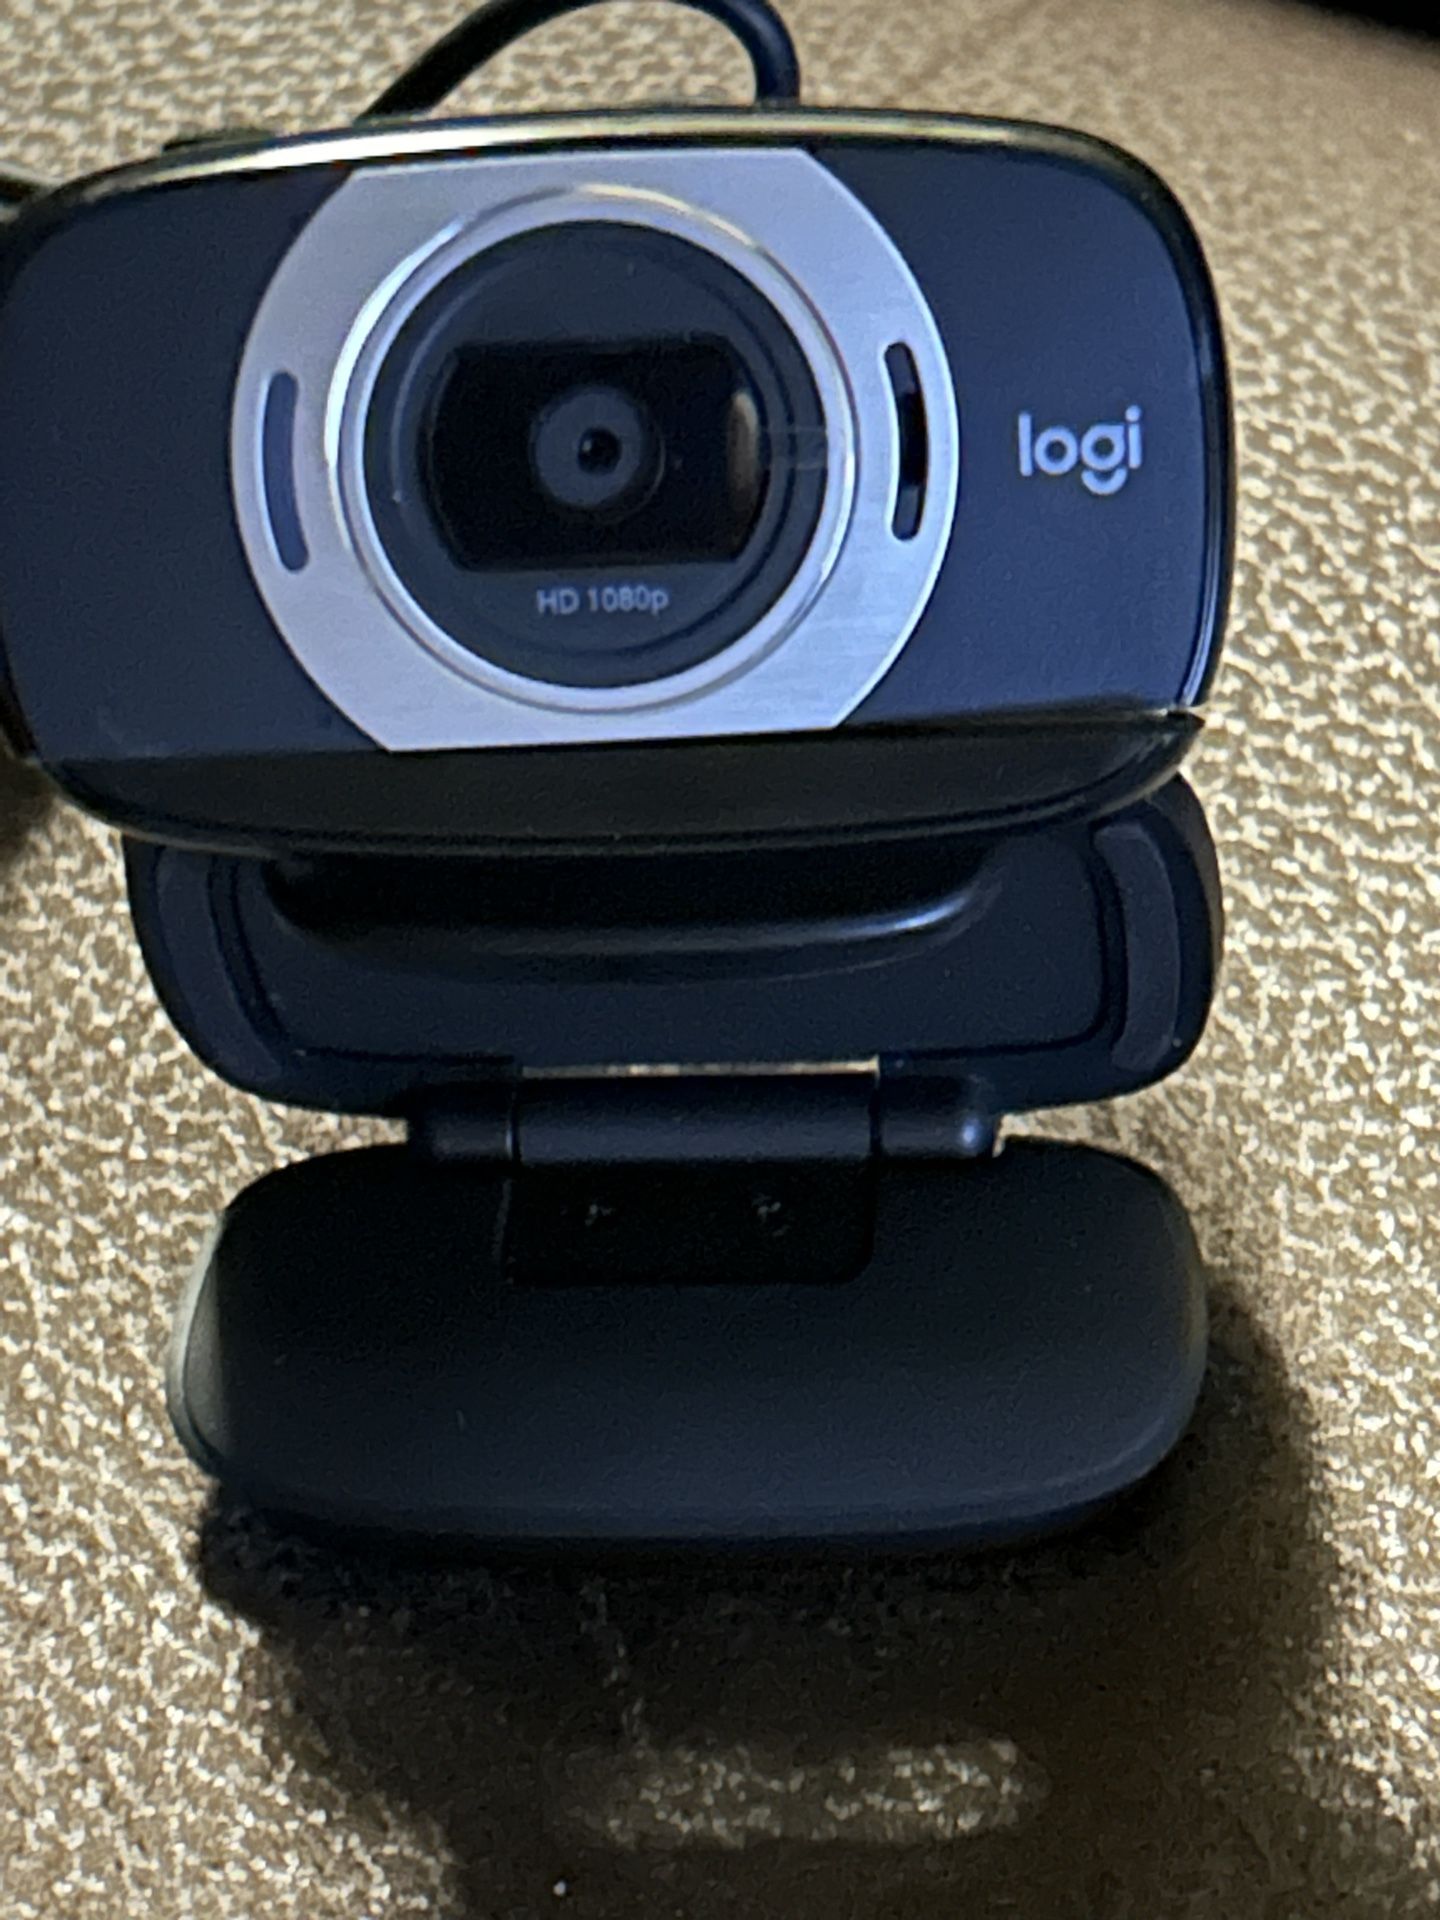 Logitech HD Webcam C615 with Fold-and-Go 360-Degree Swivel, 1080p Camera for Sale in The Bronx, NY OfferUp